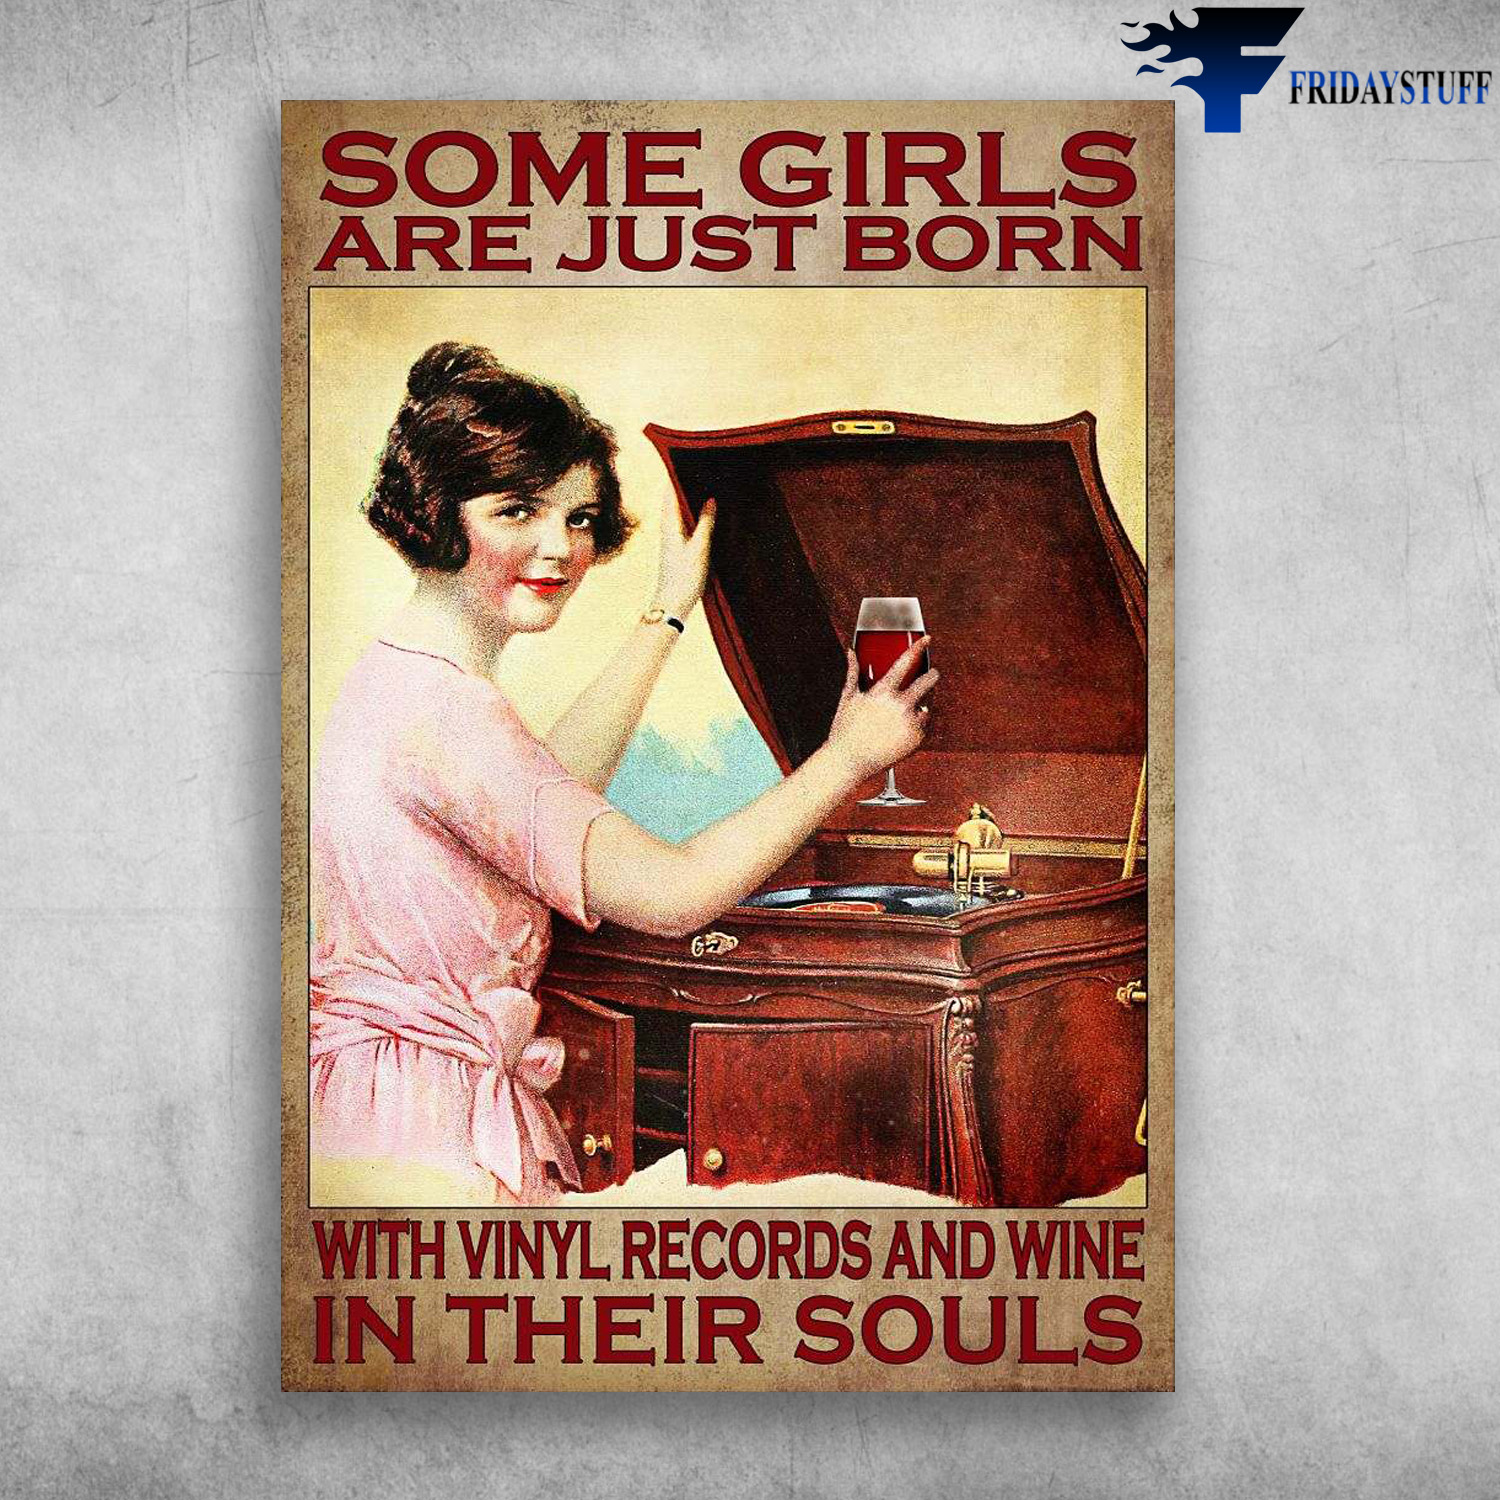 Vinyl Records And Wine, Wine Girl - Some Girls Are Just Born, With Vinyl Records And Wine, In Their Souls